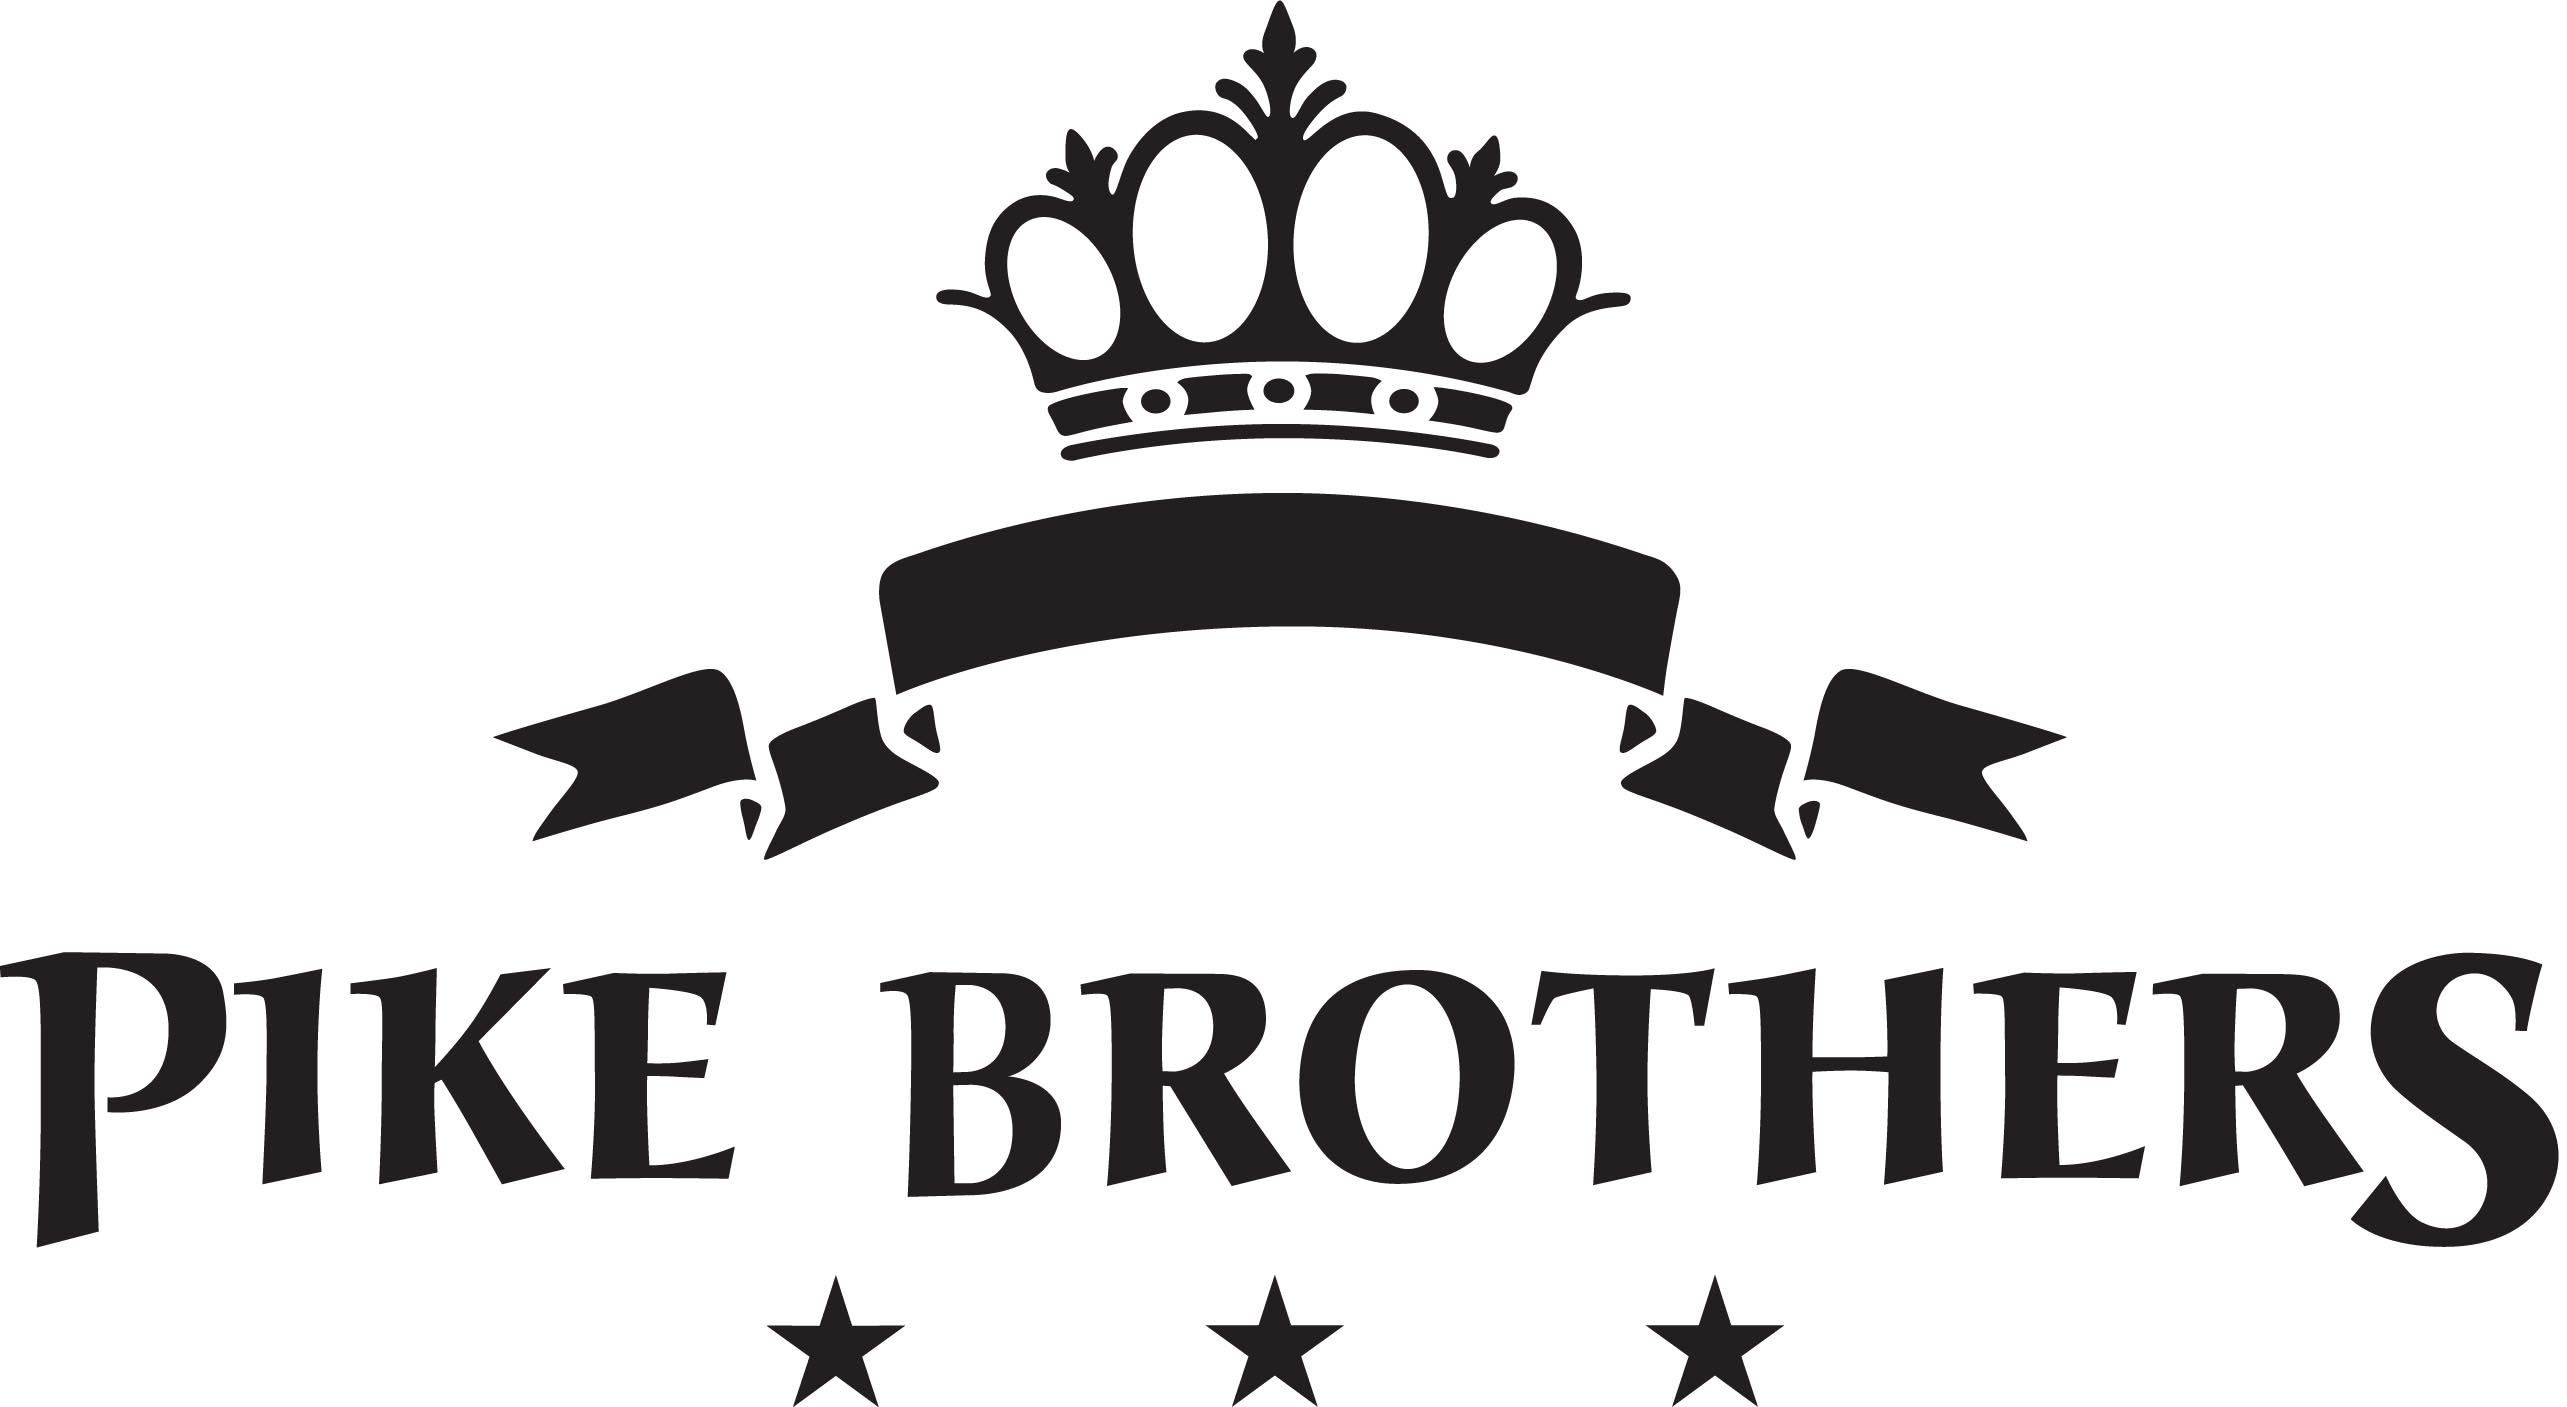 Pike Brothers-Logo-Krone